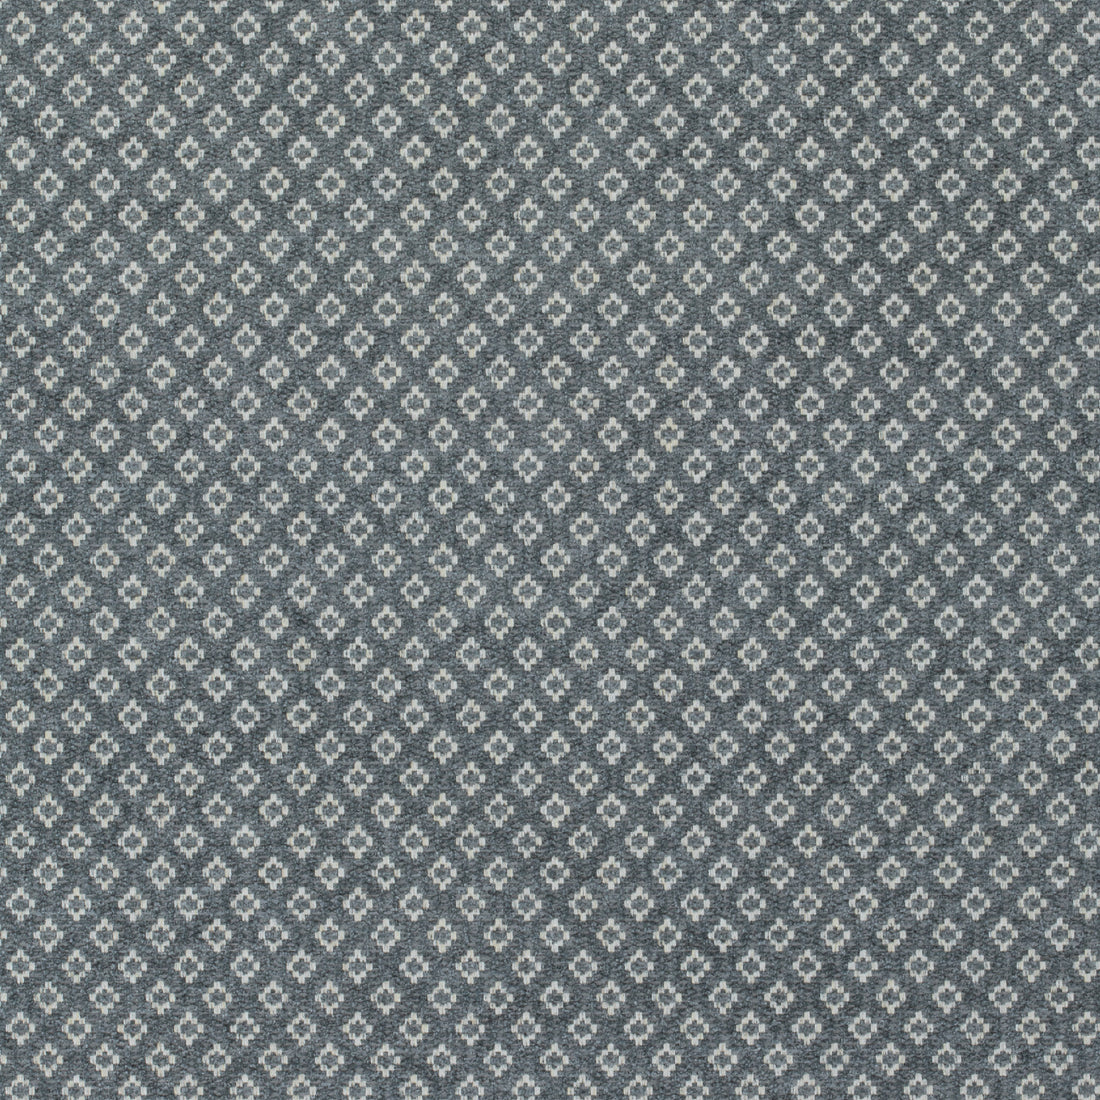 Claudio fabric in charcoal color - pattern number AW72999 - by Anna French in the Manor collection